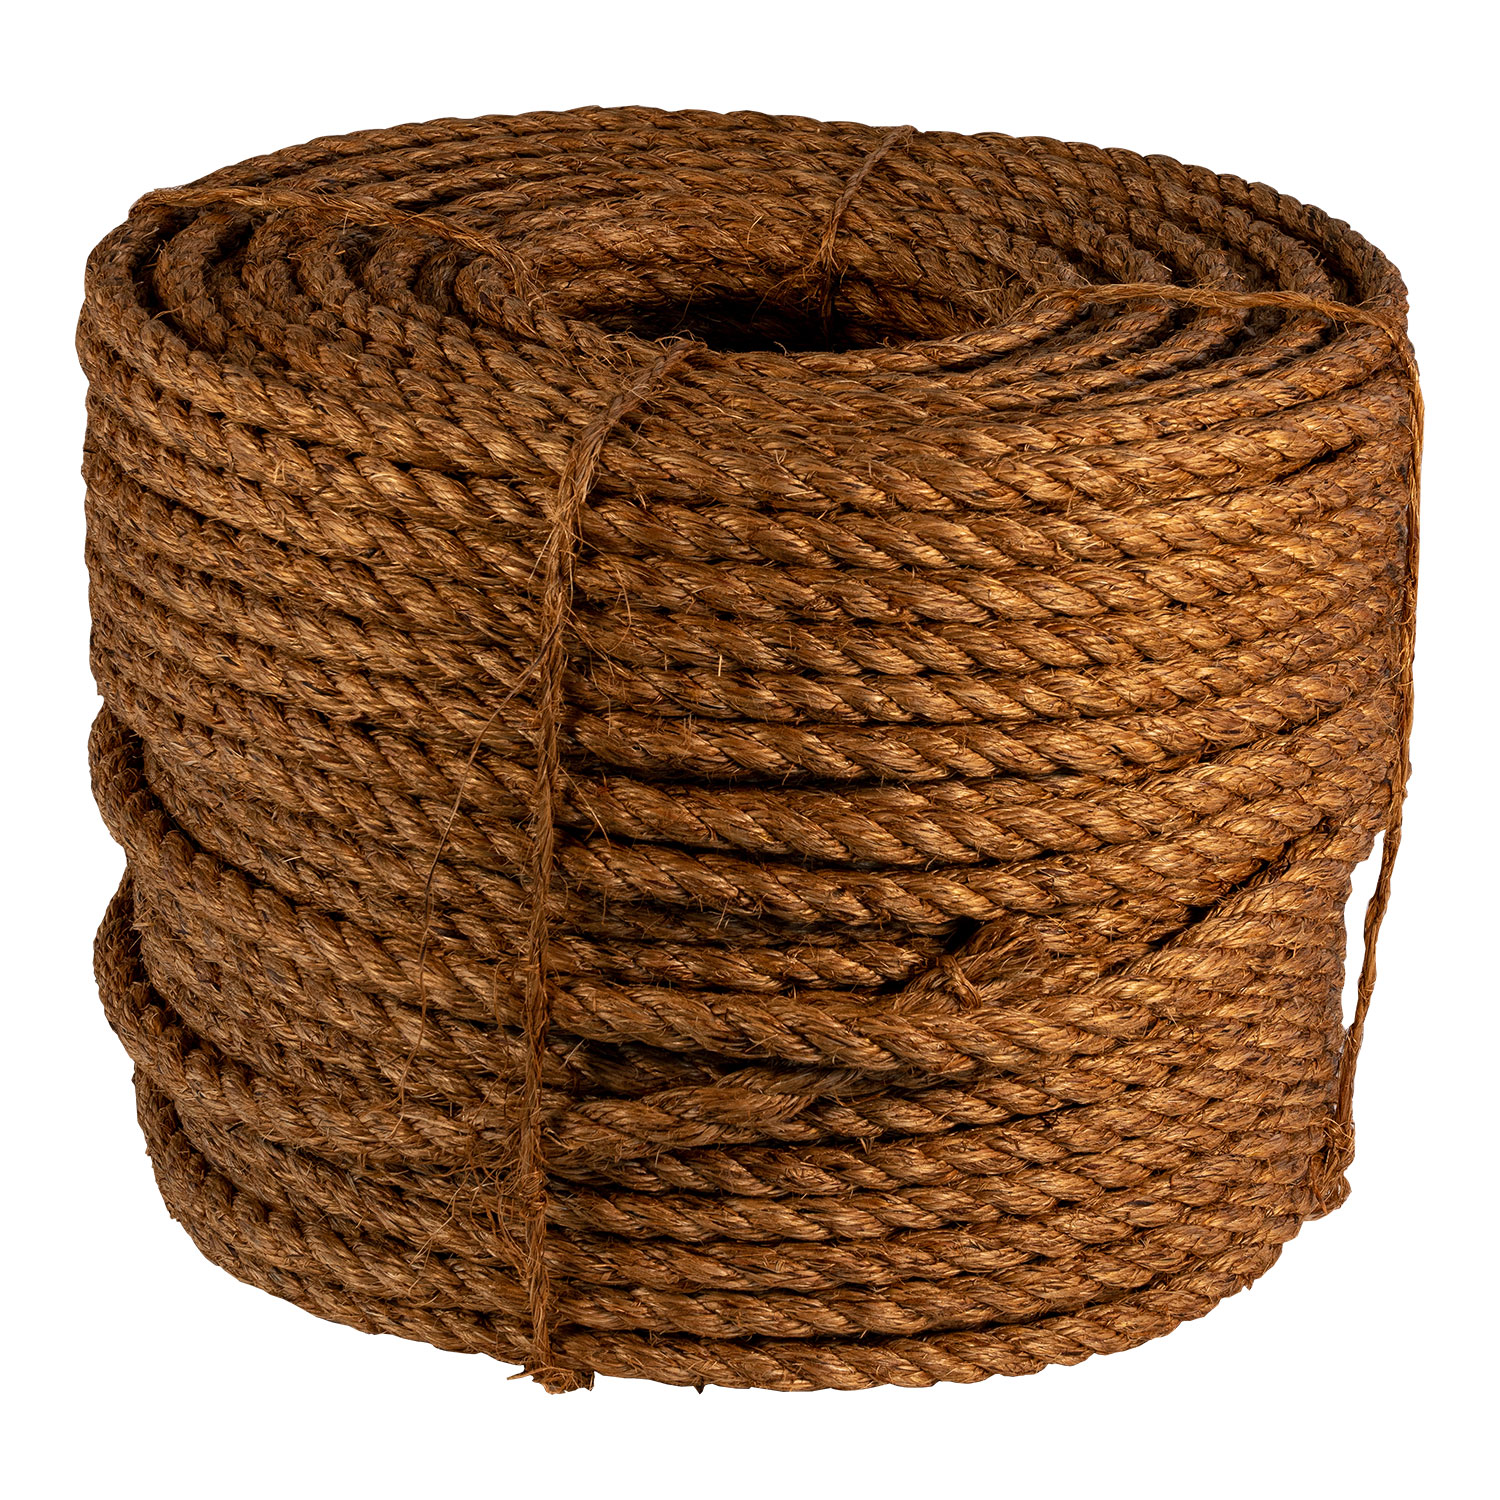 8mm SISAL ROPE natural fibre 3-strand twisted abrasion resistant 